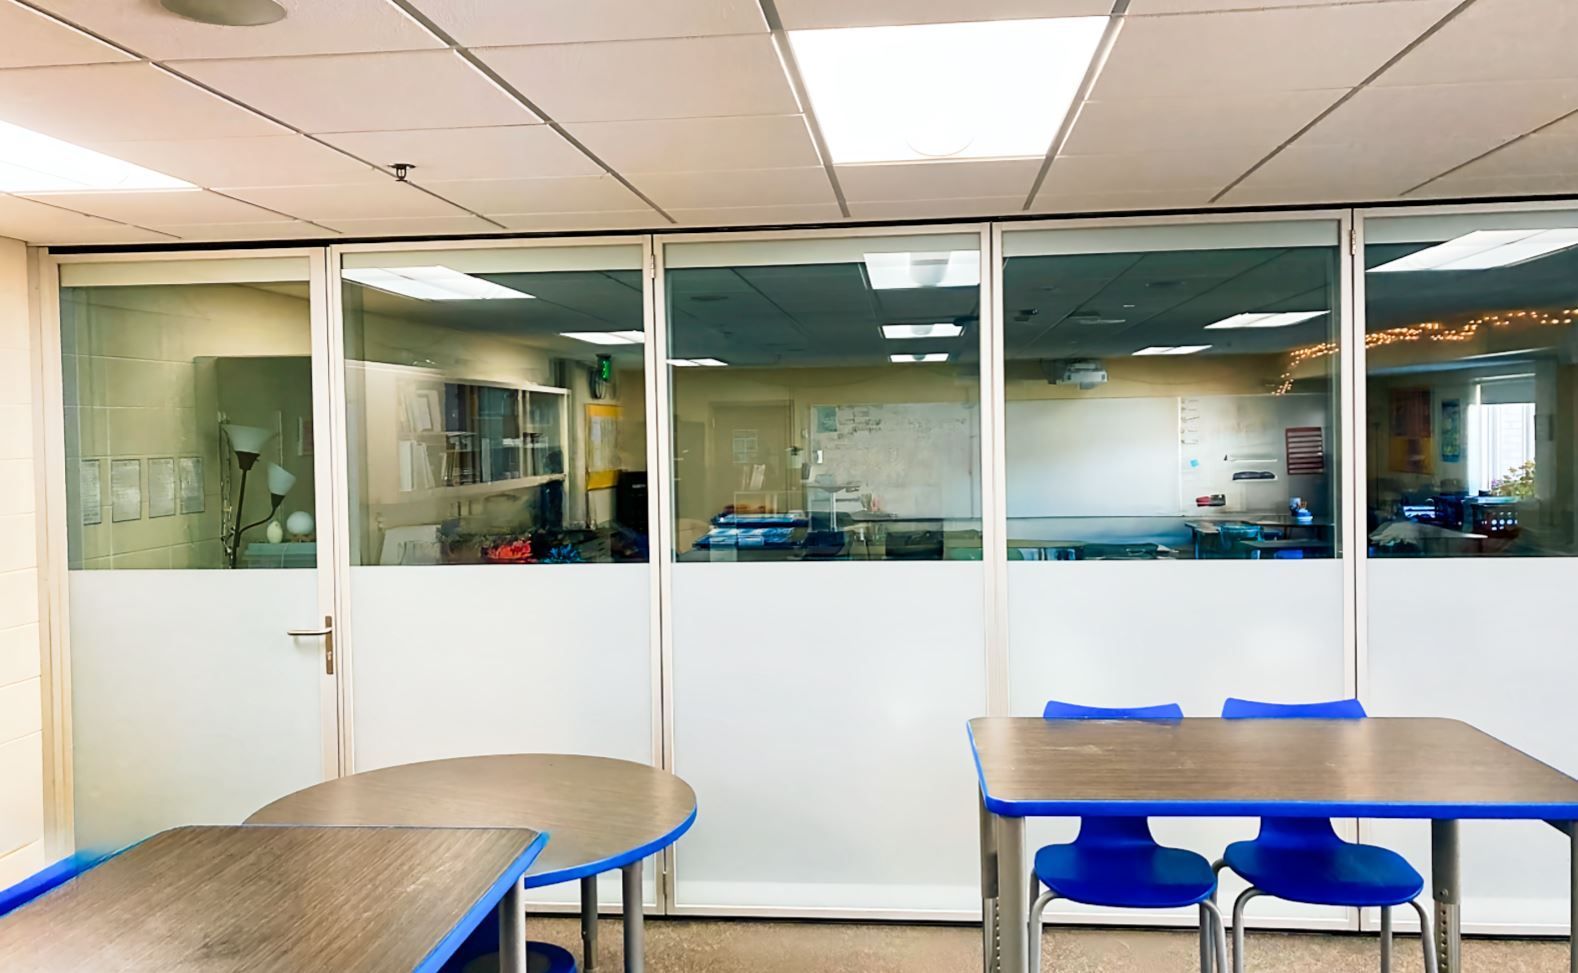 w l hall company Hopkins Senior High & West Junior High Schools Utilize ZONA & Modernfold Glass Walls for Collaborative, Safe and Flexible Learning Environments 2